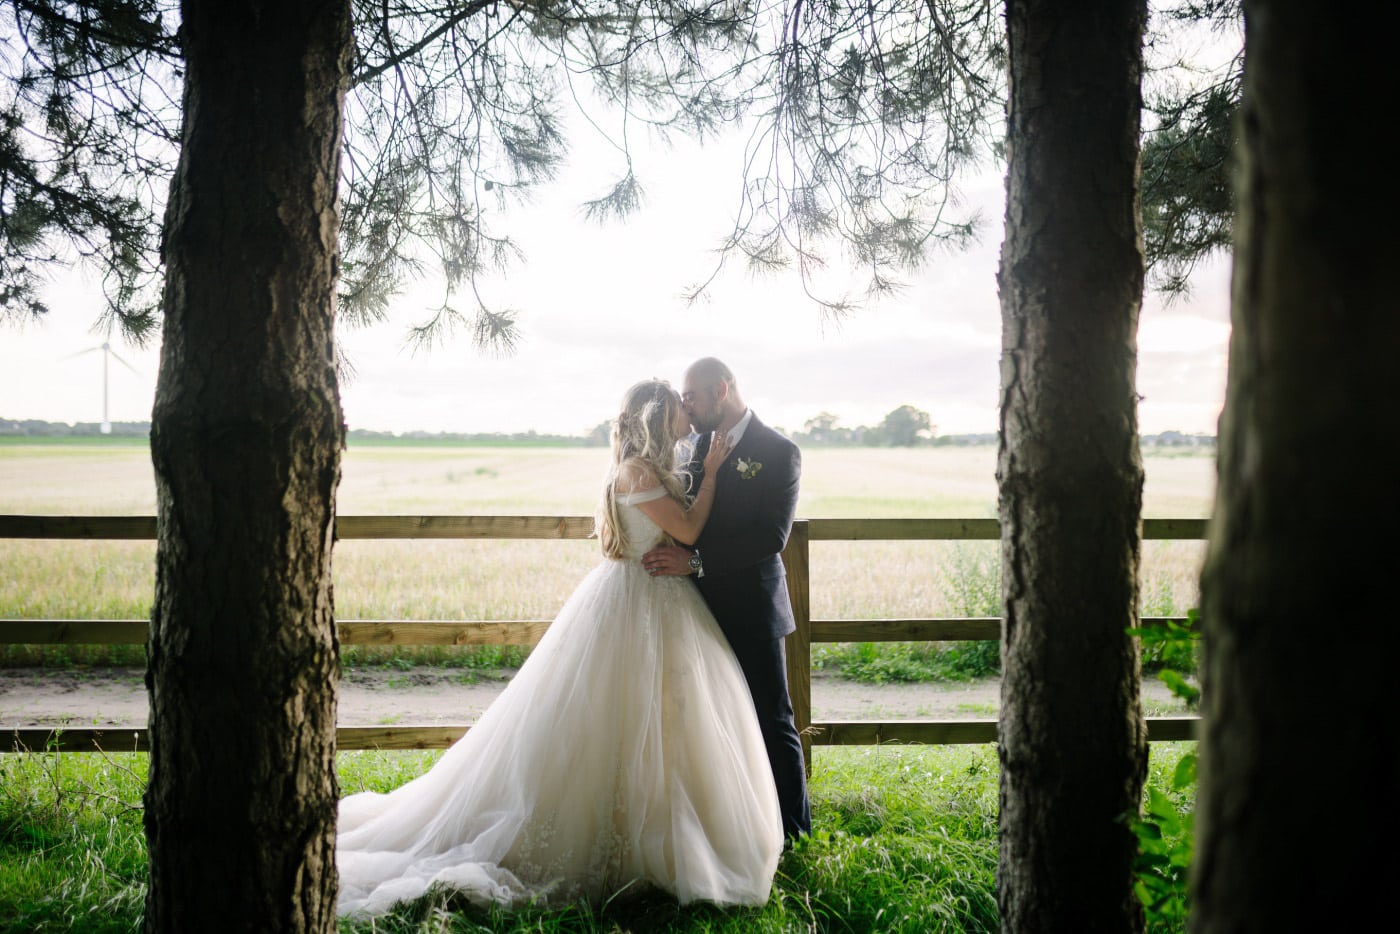 brides love to explore the woods through the doors at the back of the barn venue